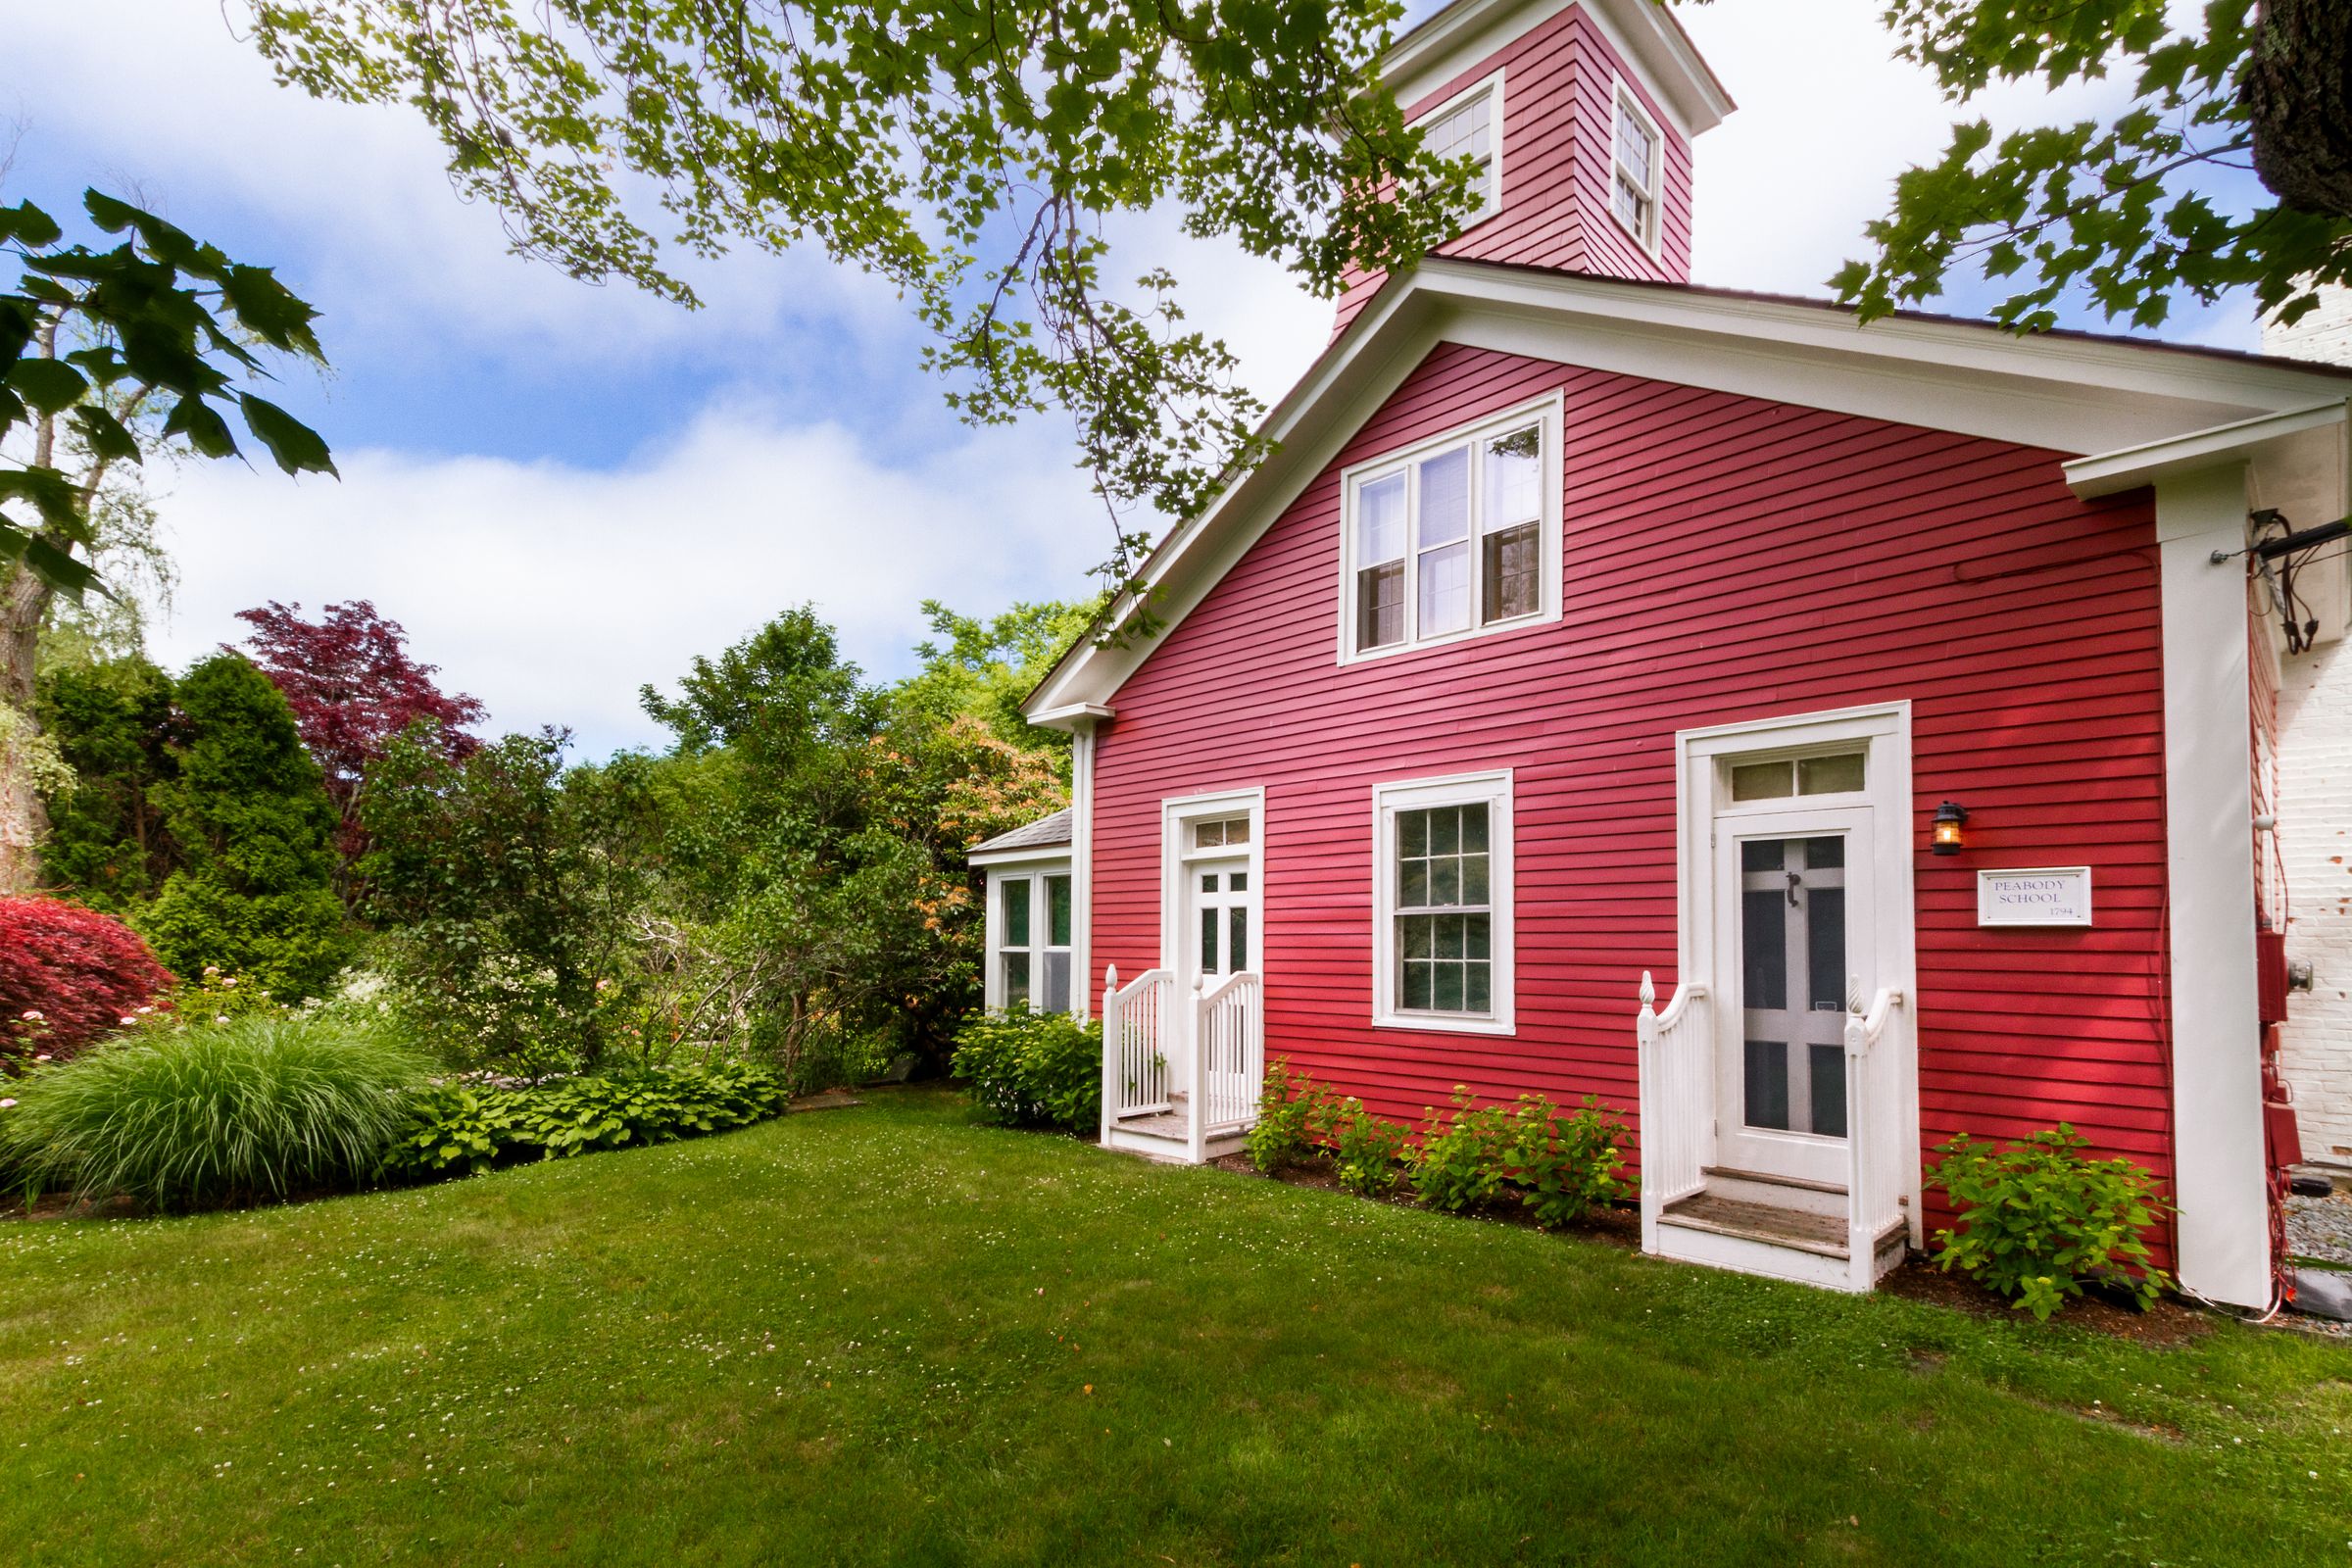 HOUSE LUST: A LITTLE RED SCHOOLHOUSE BY THE SEA IN MIDDLETOWN